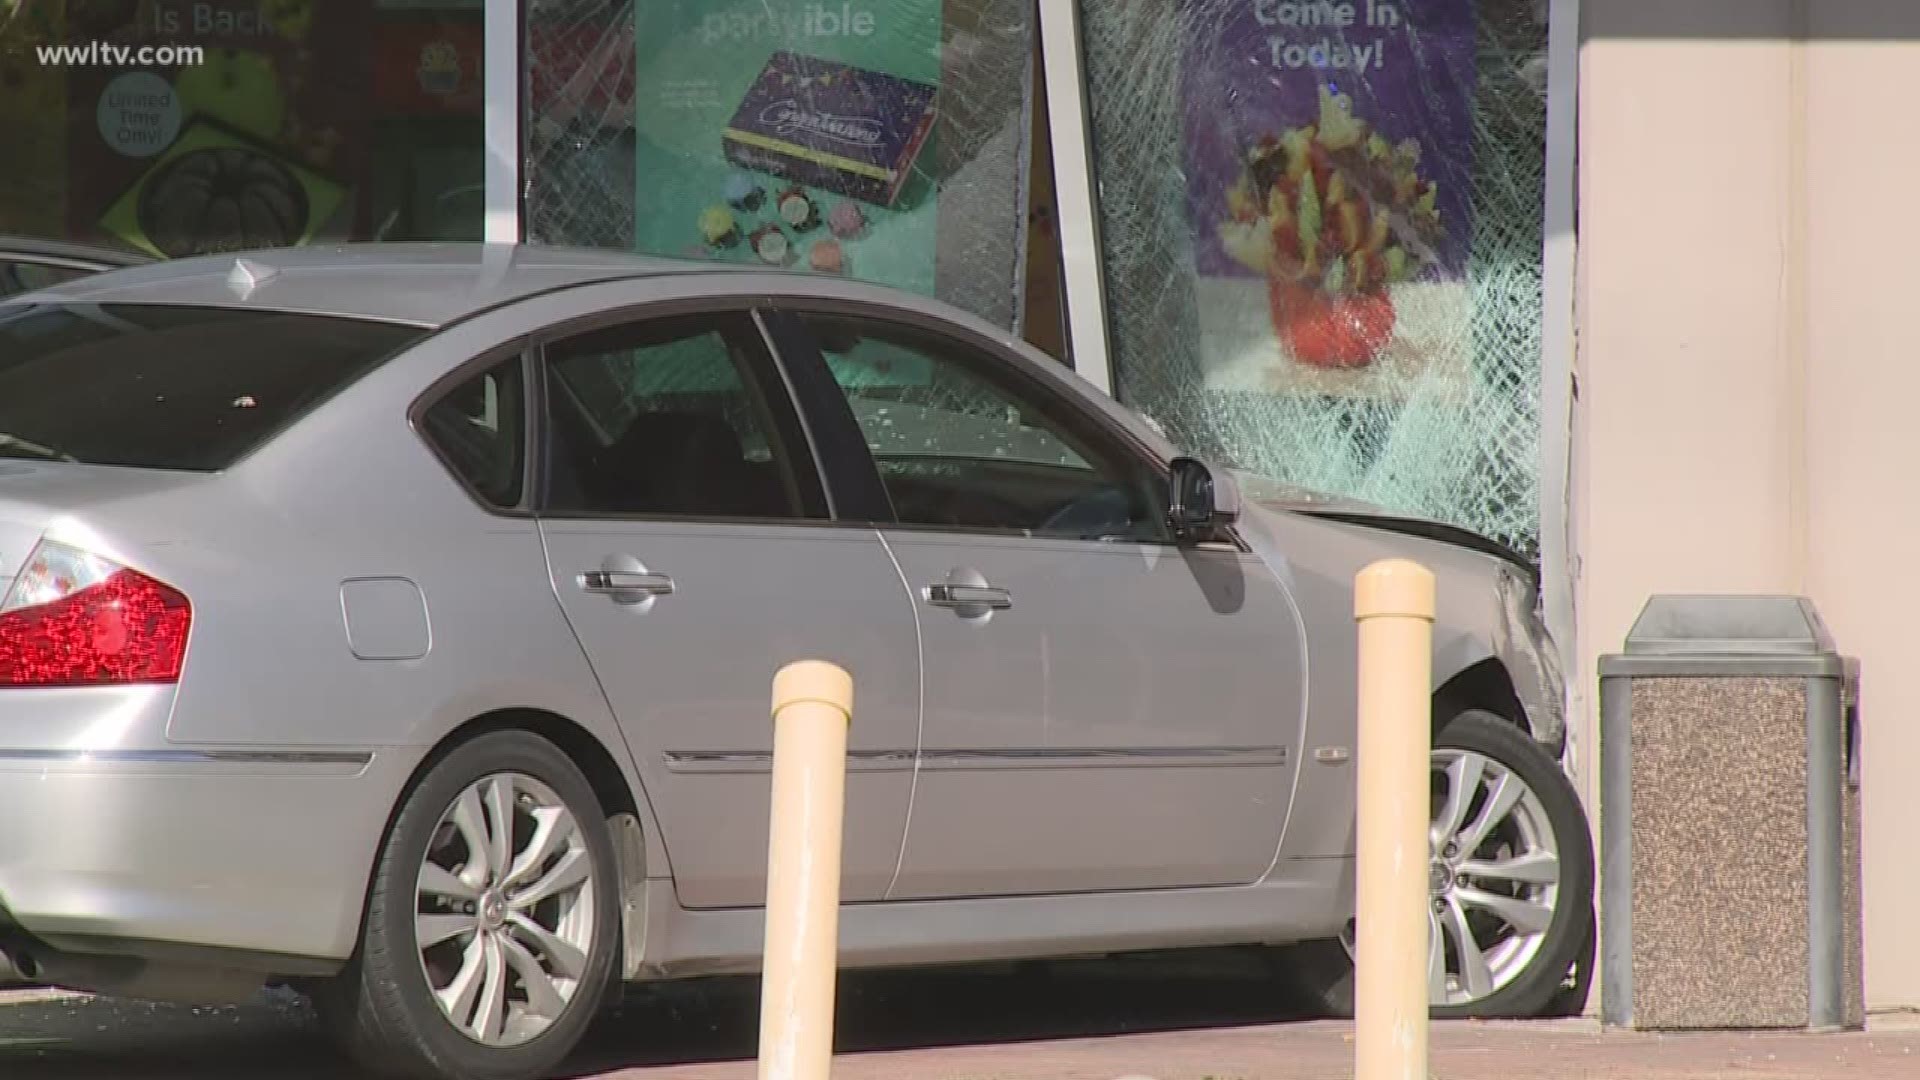 New Orleans Police are working to find out how a car wound up in an edible arrangements store.